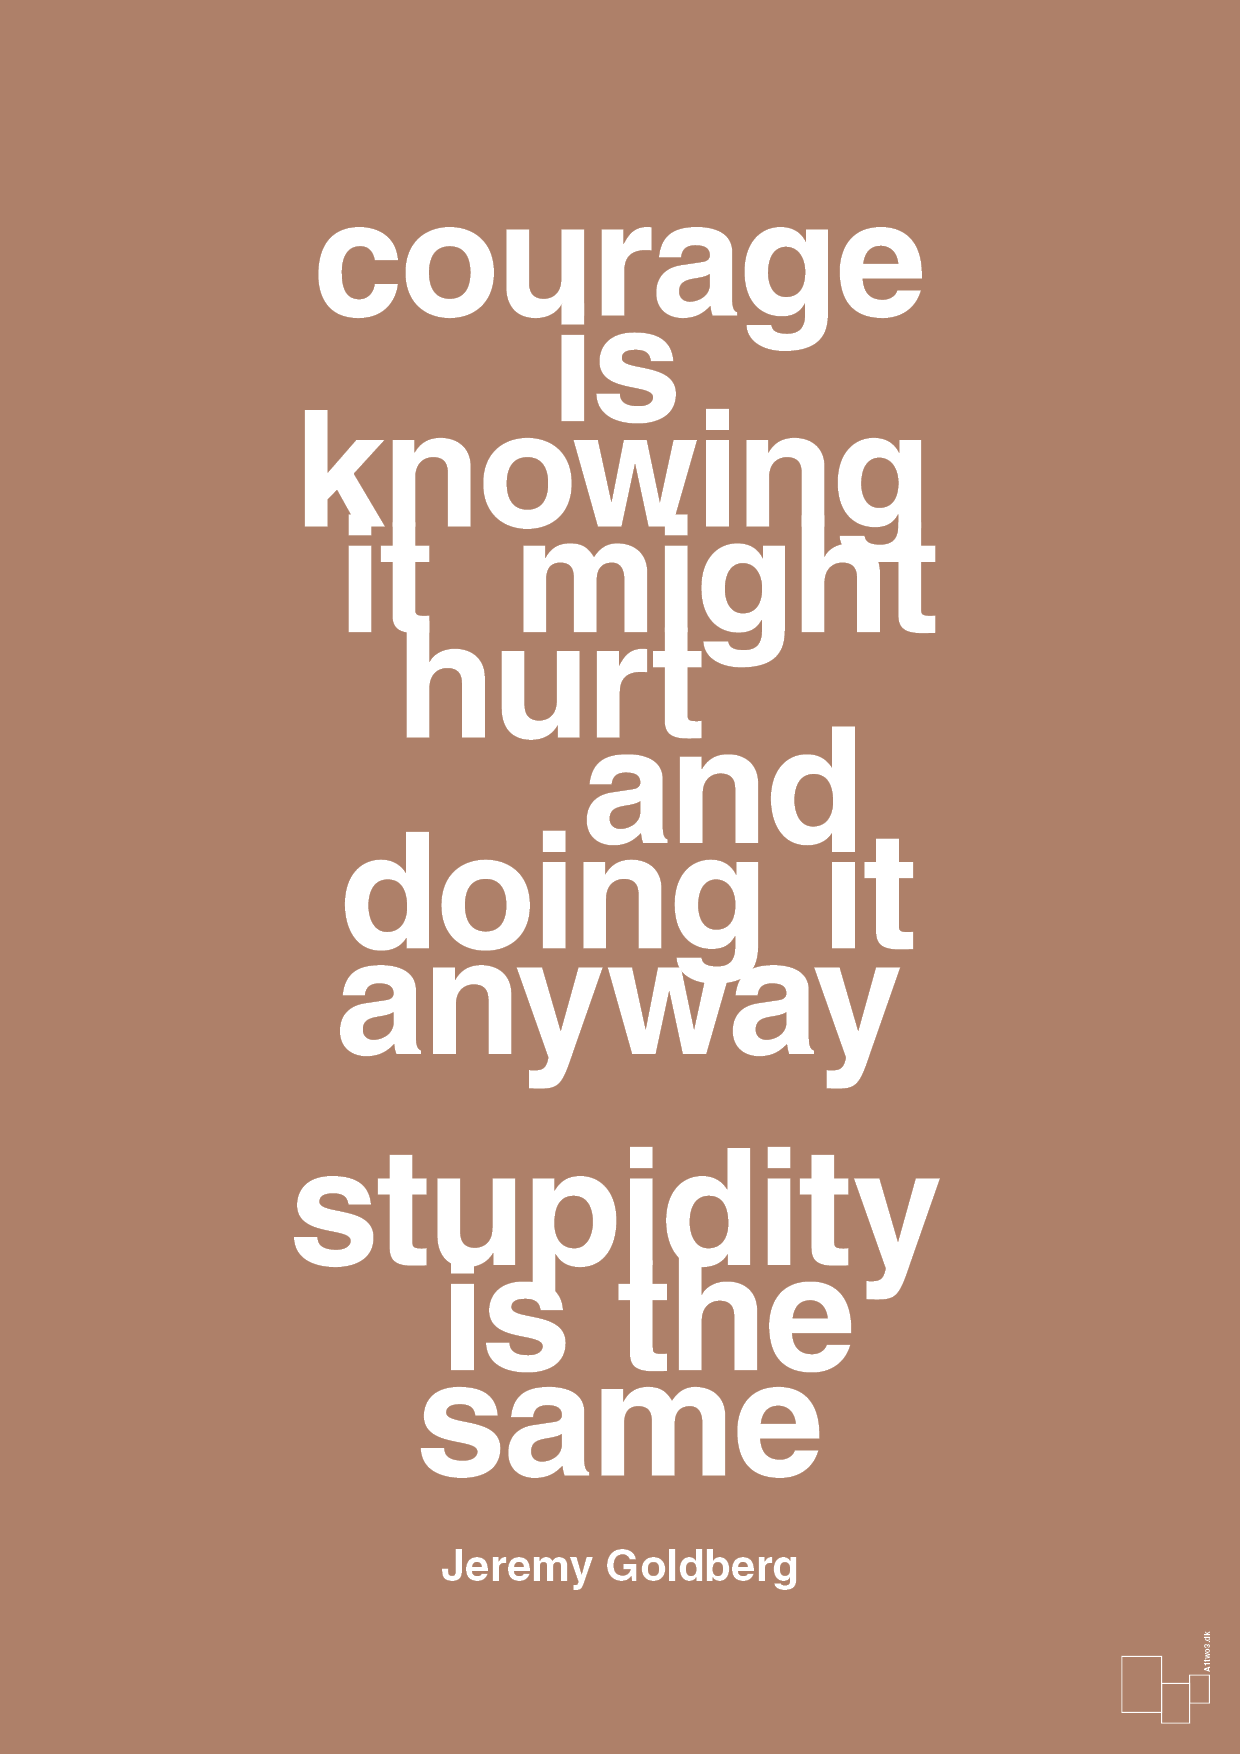 courage is knowing it might hurt and doing it anyway stupidity is the same - Plakat med Citater i Cider Spice